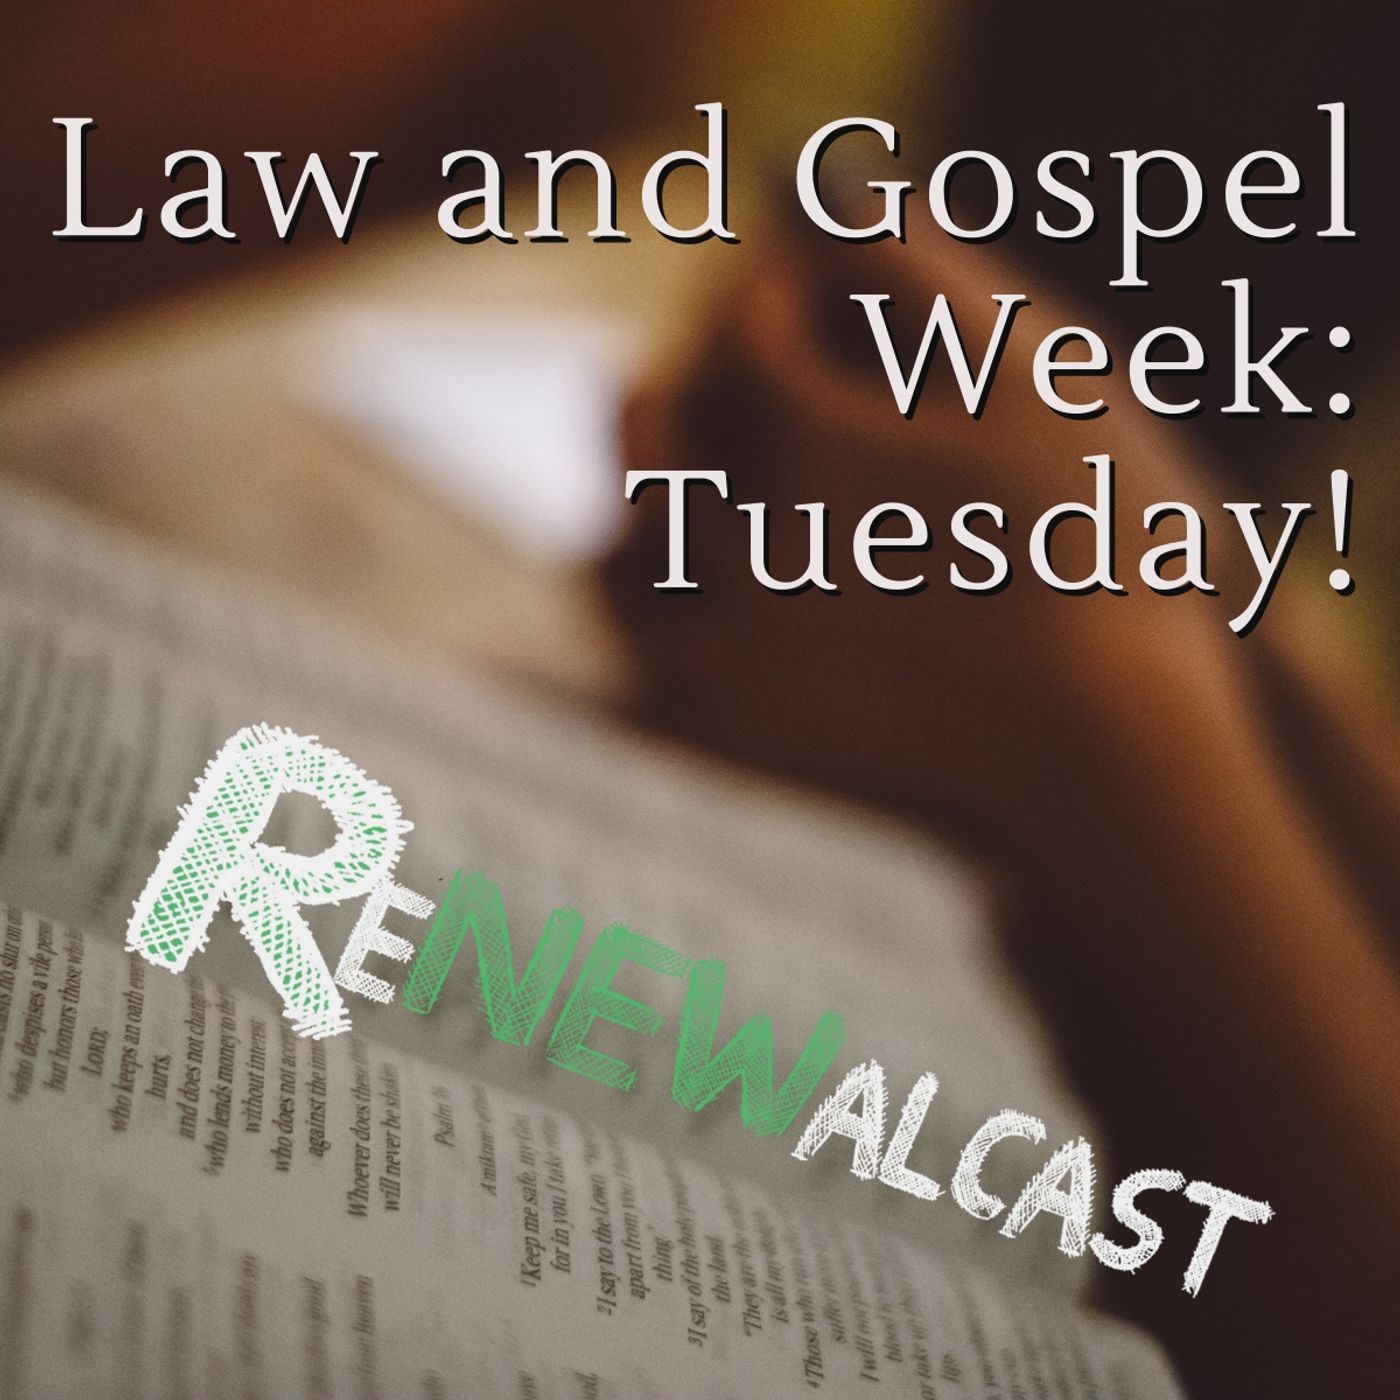 Law and Gospel Week: Tuesday!